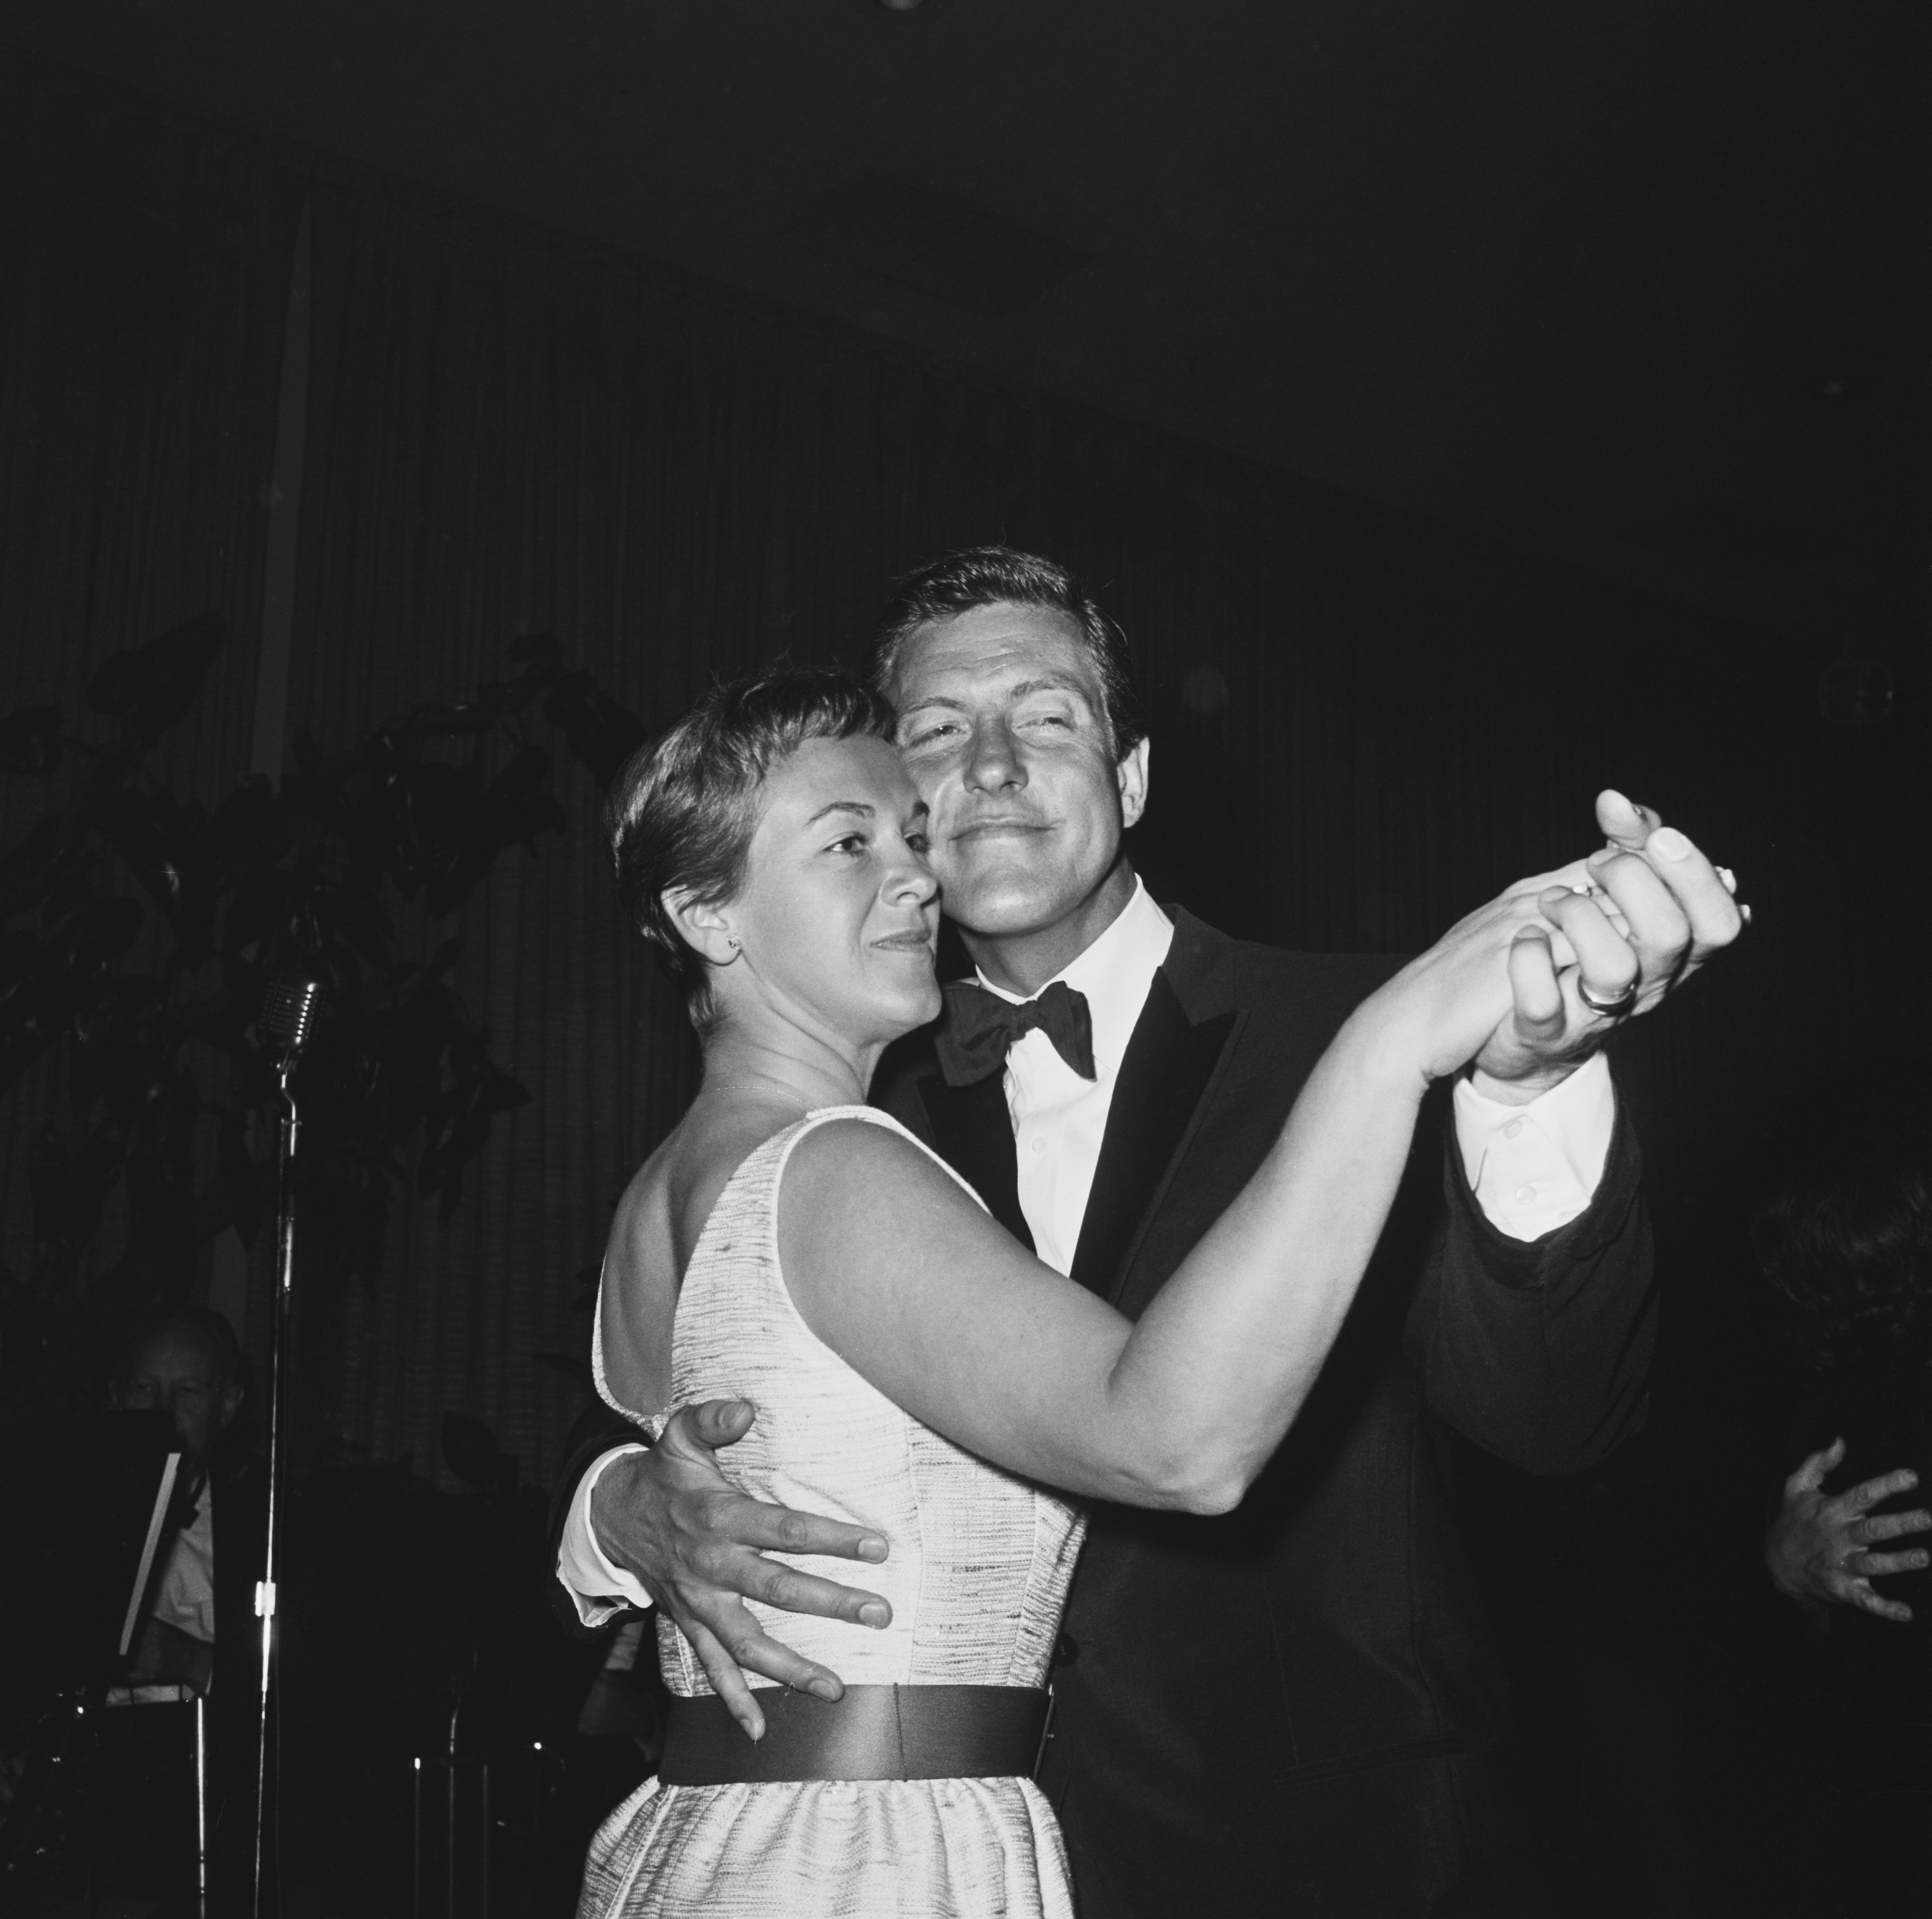 American actor, comedian and singer Dick Van Dyke dancing with his wife Margie at a Screen Producers' Guild party, USA, 1964. |Source: Getty Images